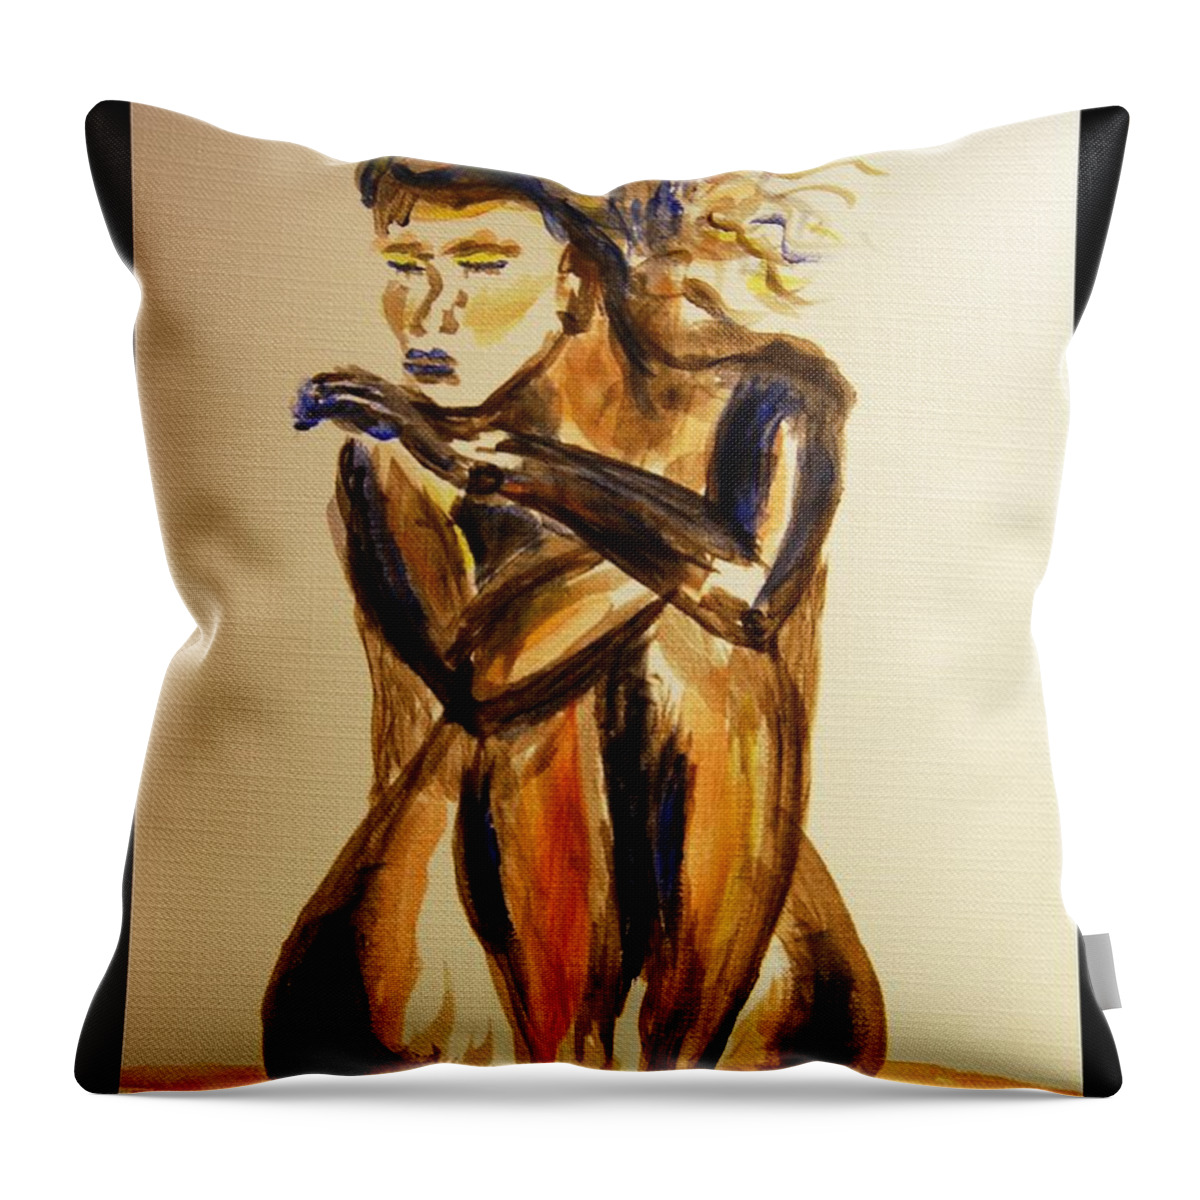 Seated Throw Pillow featuring the painting Melancholy by Angela Murray